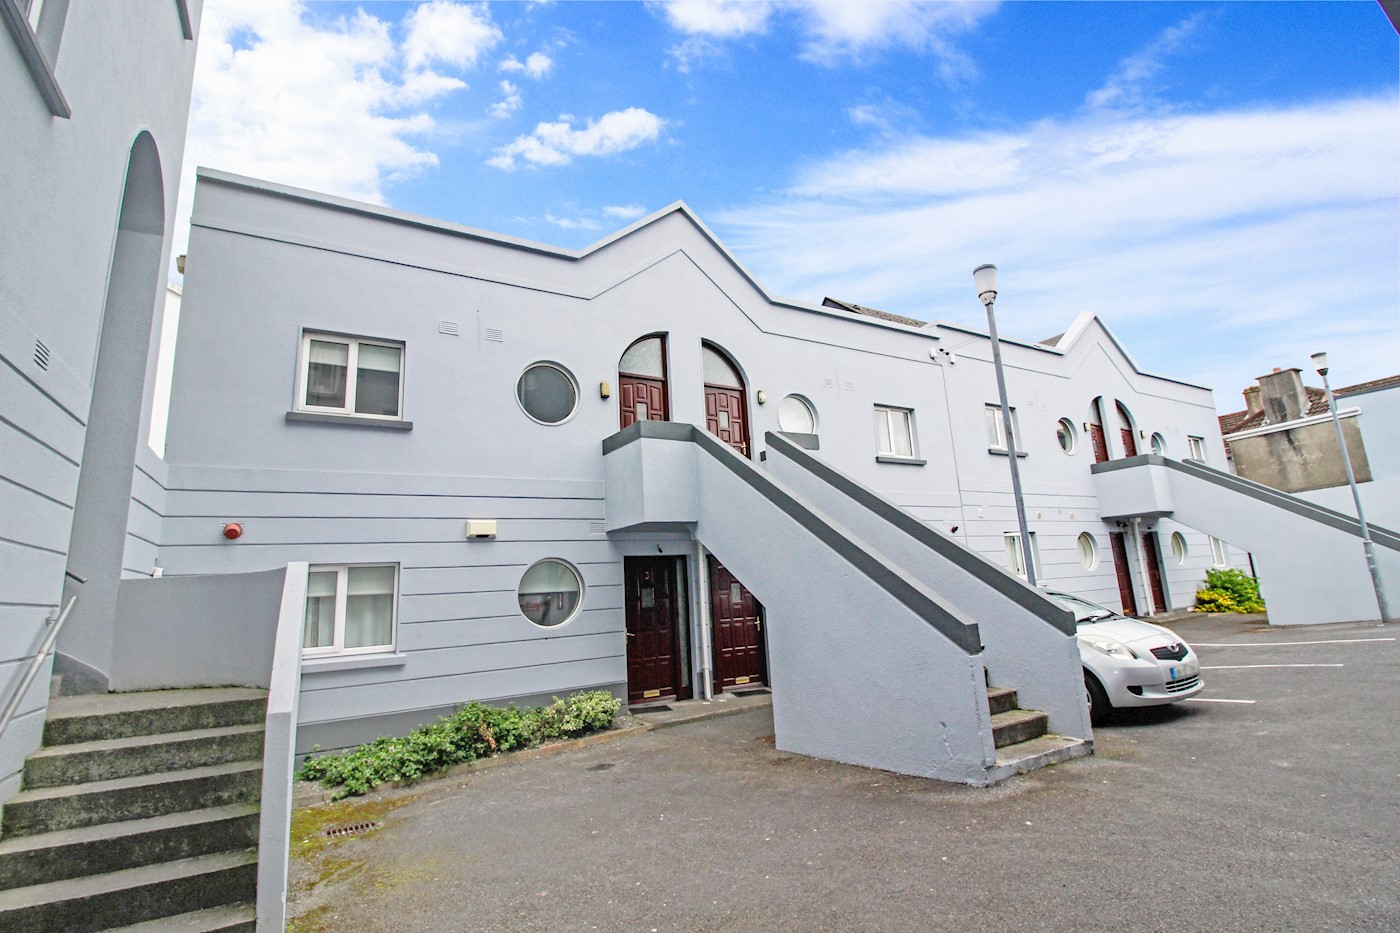 Apartment 8, Drum Ard, Prospect Hill, Co. Galway, H91 PDE5 1/2